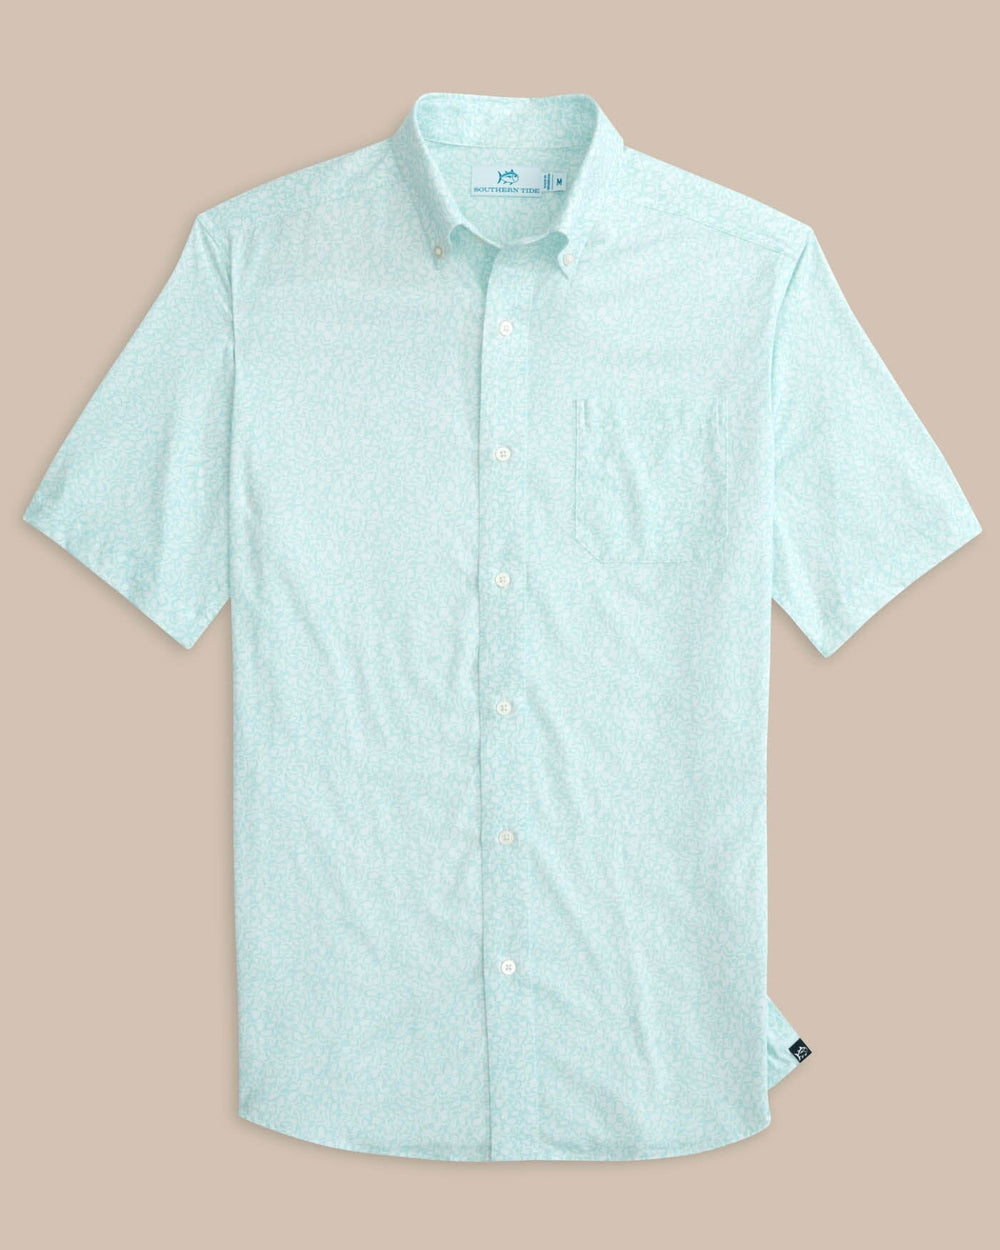 The front view of the Southern Tide brrr Intercoastal That Floral Feeling Short Sleeve Sport Shirt by Southern Tide - Classic White